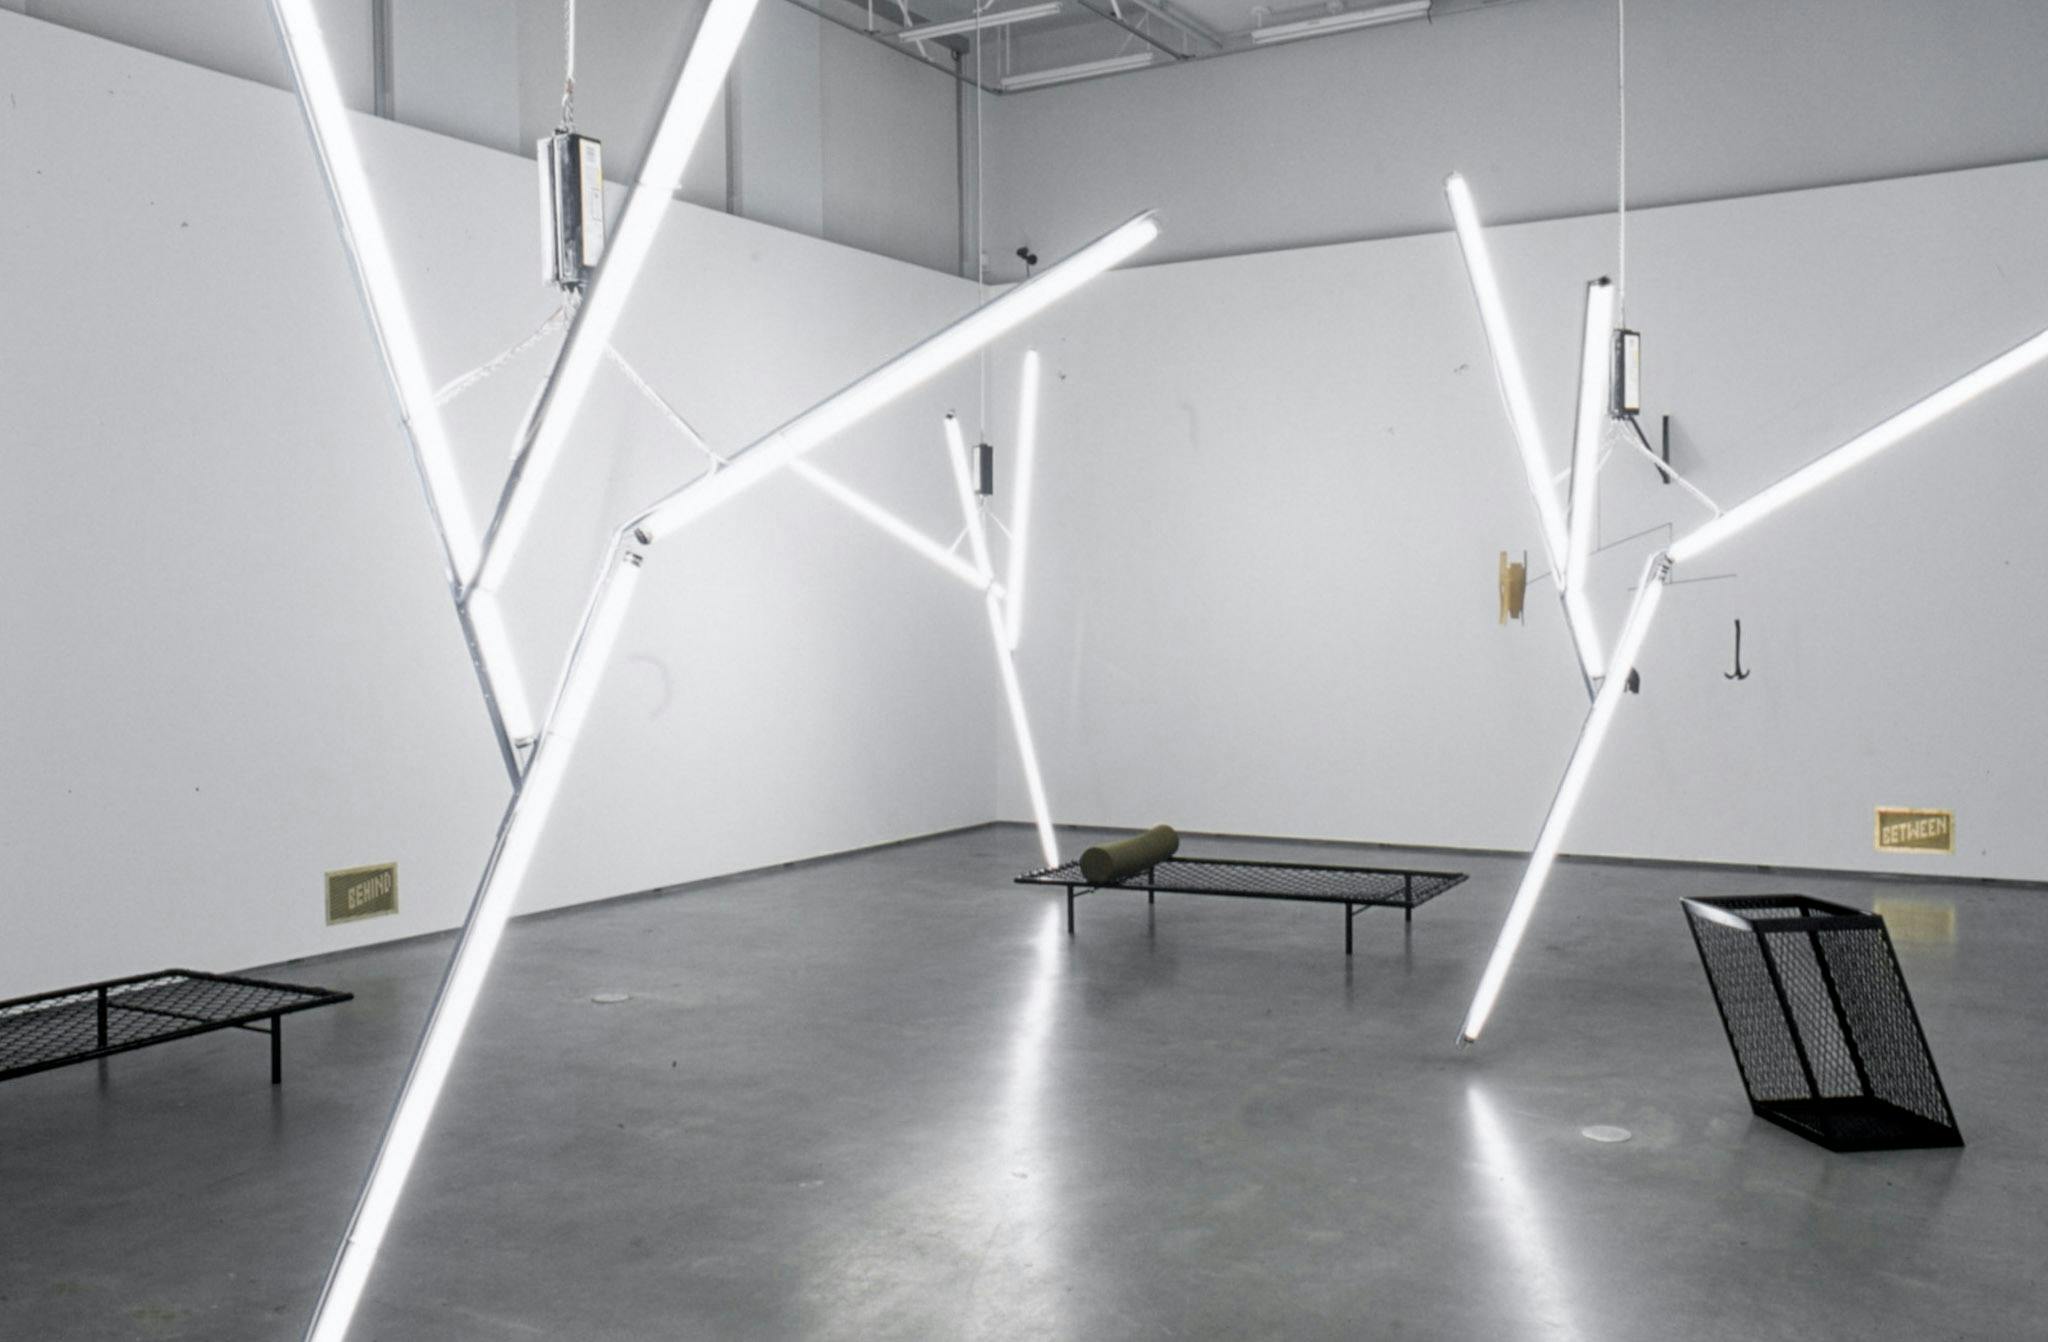 Three large sized sculptures are hanging from the ceiling of a gallery space. They are made of white tube light bulbs that are assembled to look like tree branches. 